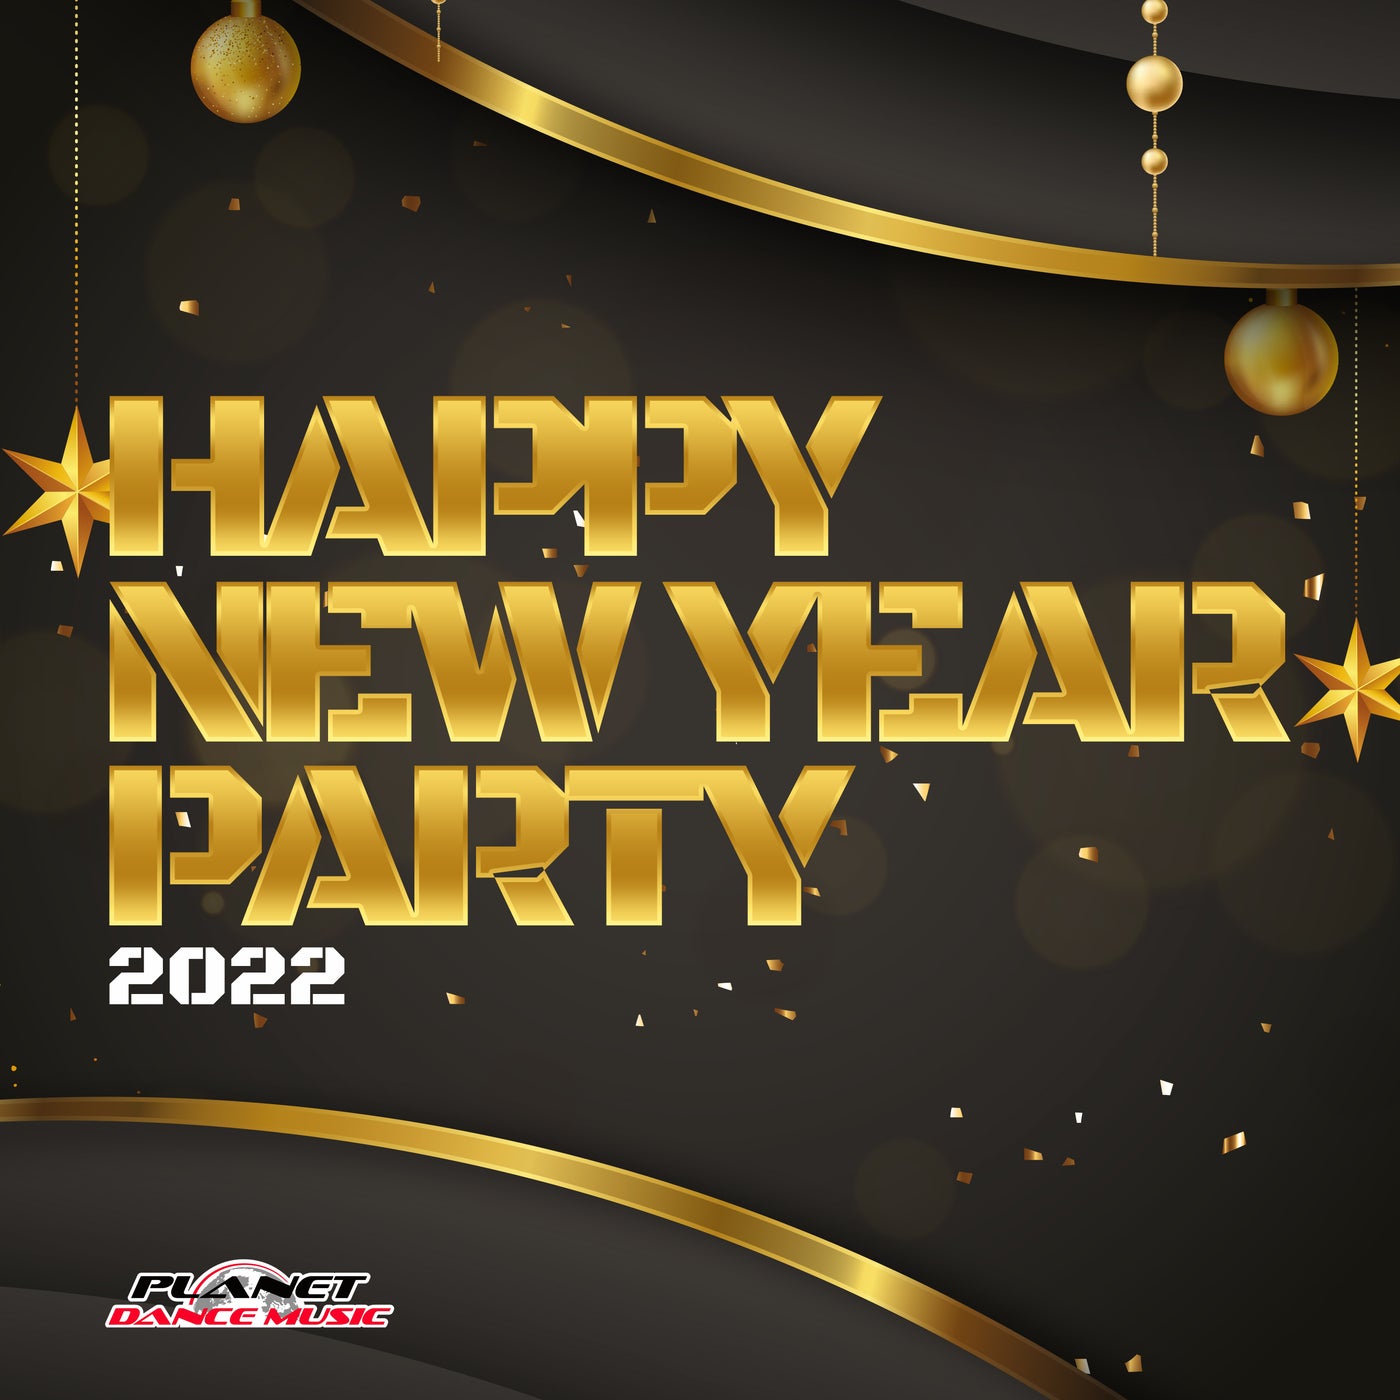 Happy New Year Party 2022